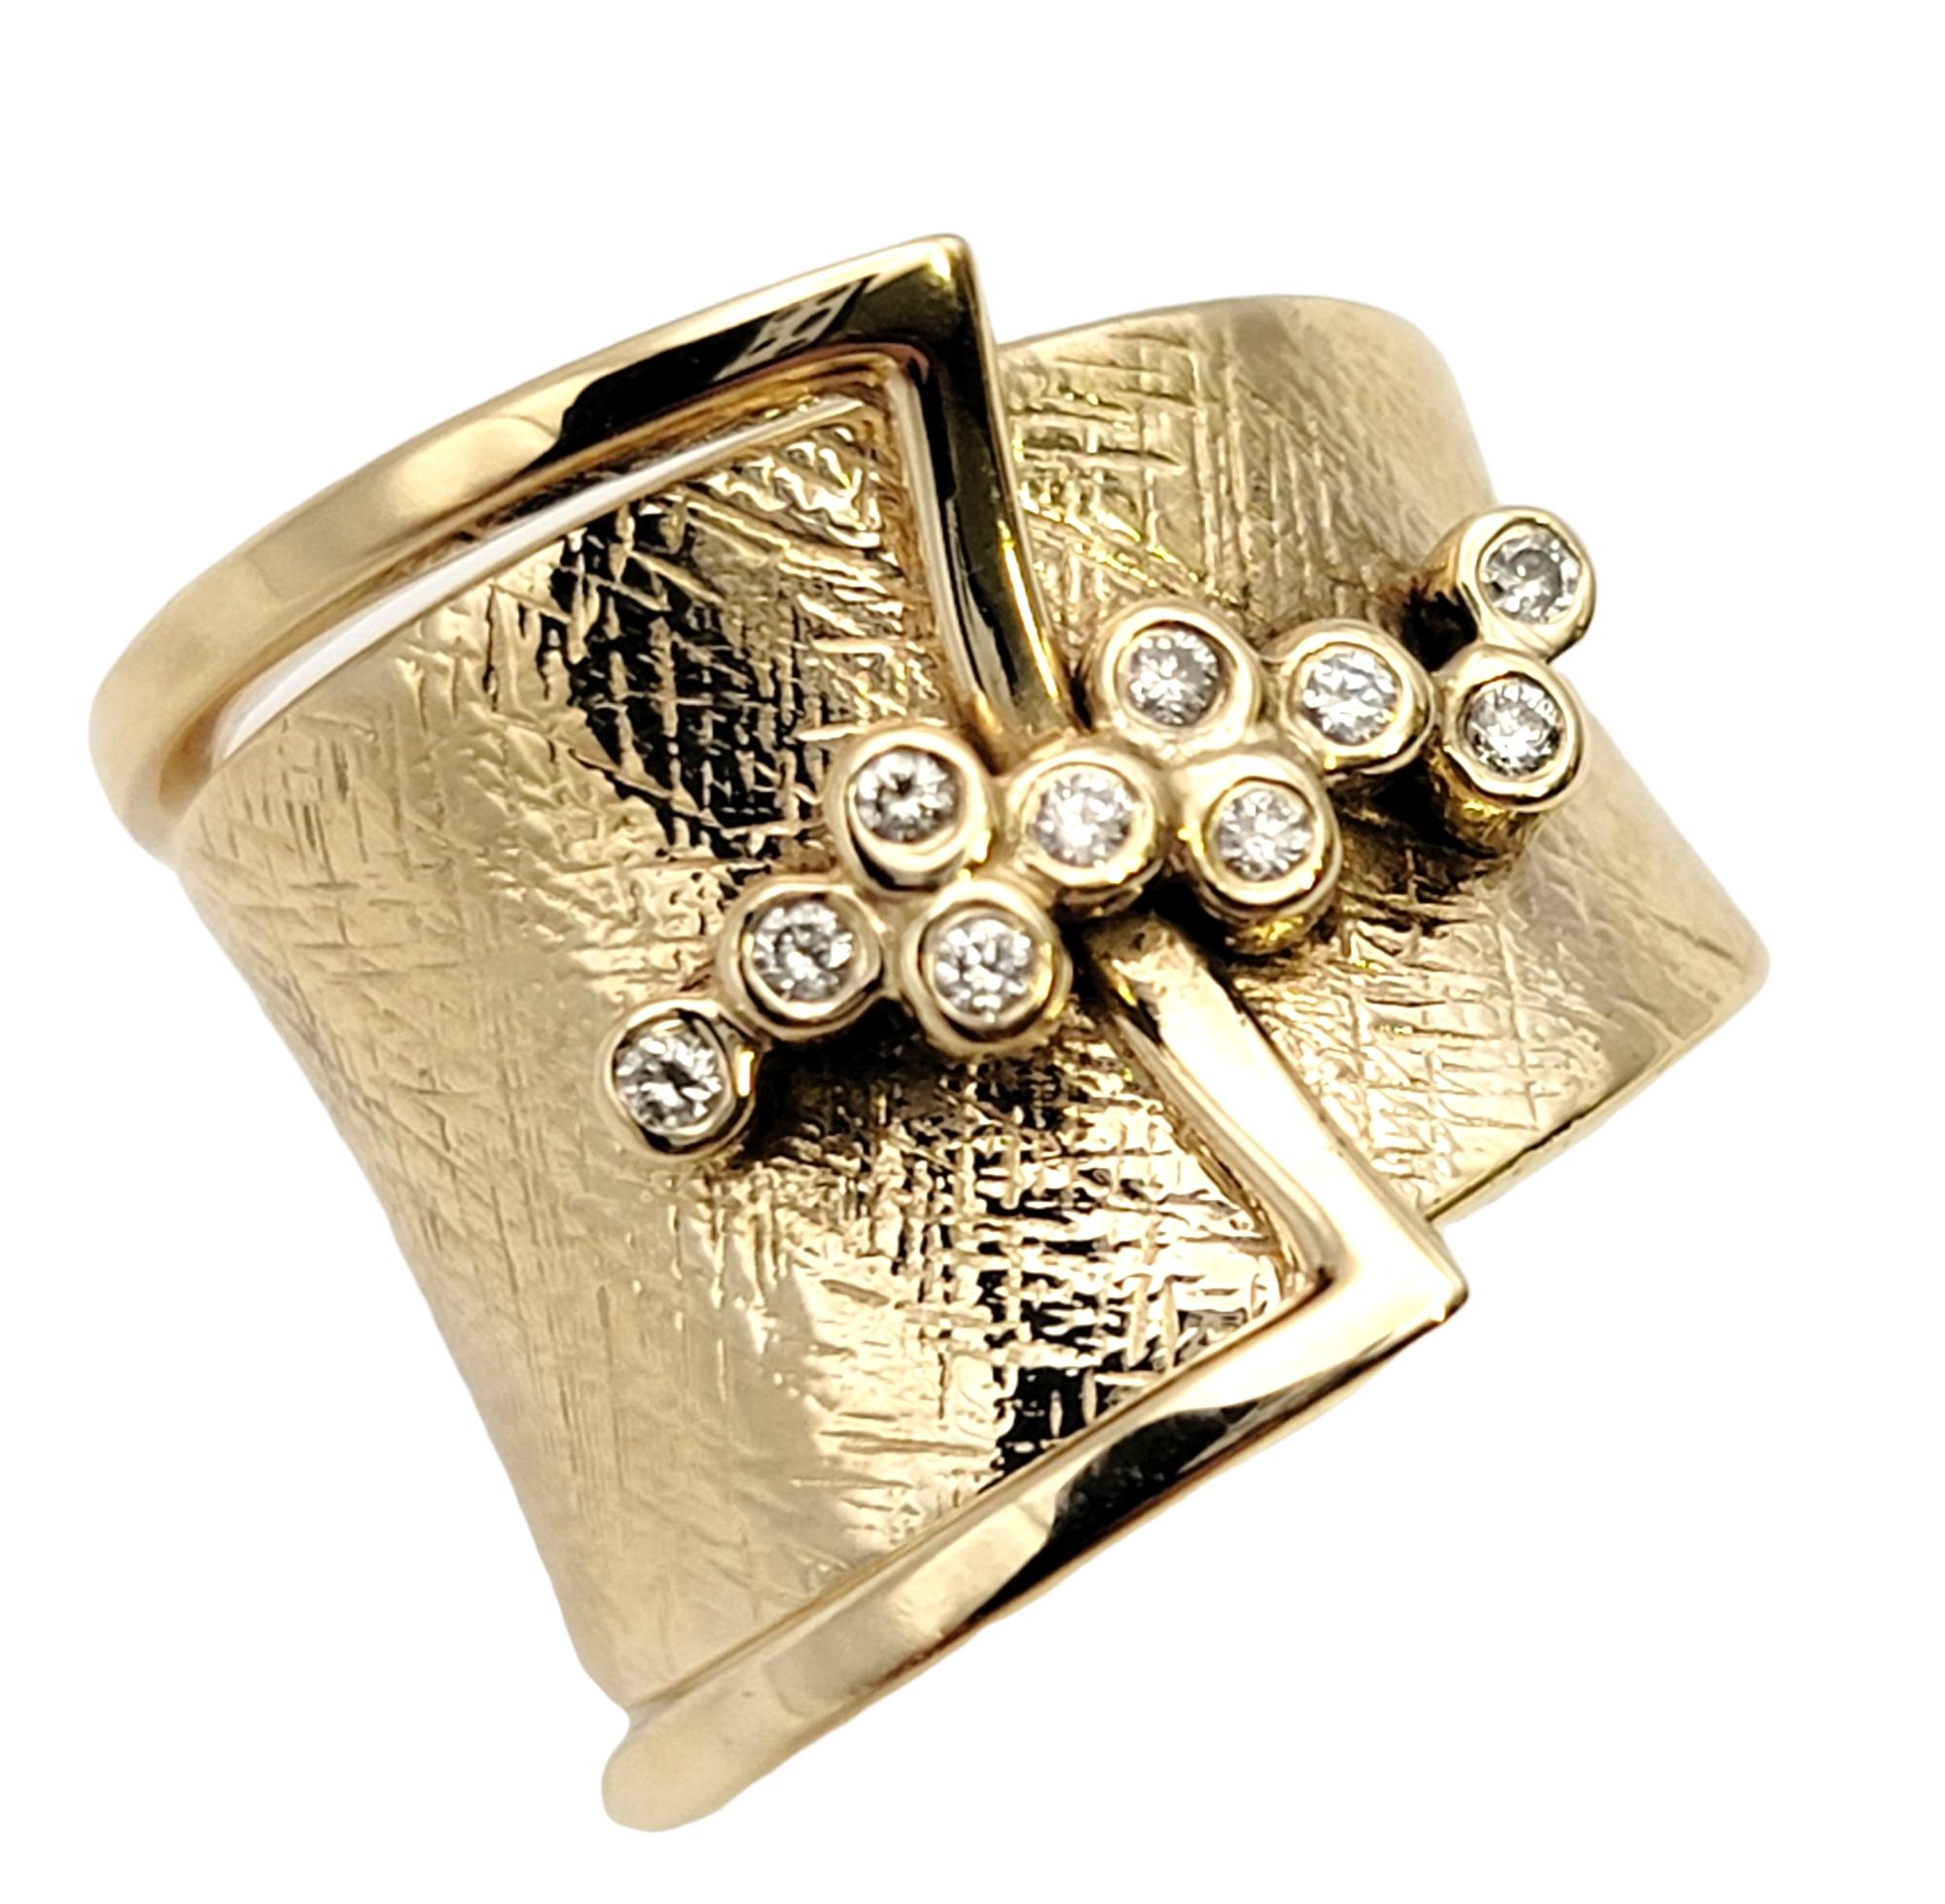 Ring size: 4.75

Chic and elegant, this beautiful Sonia B. ring will wrap your finger in modern beauty. The graduated textured yellow gold band circles the finger and is accented by a small sparkling cluster of round diamonds.
  
Ring size: